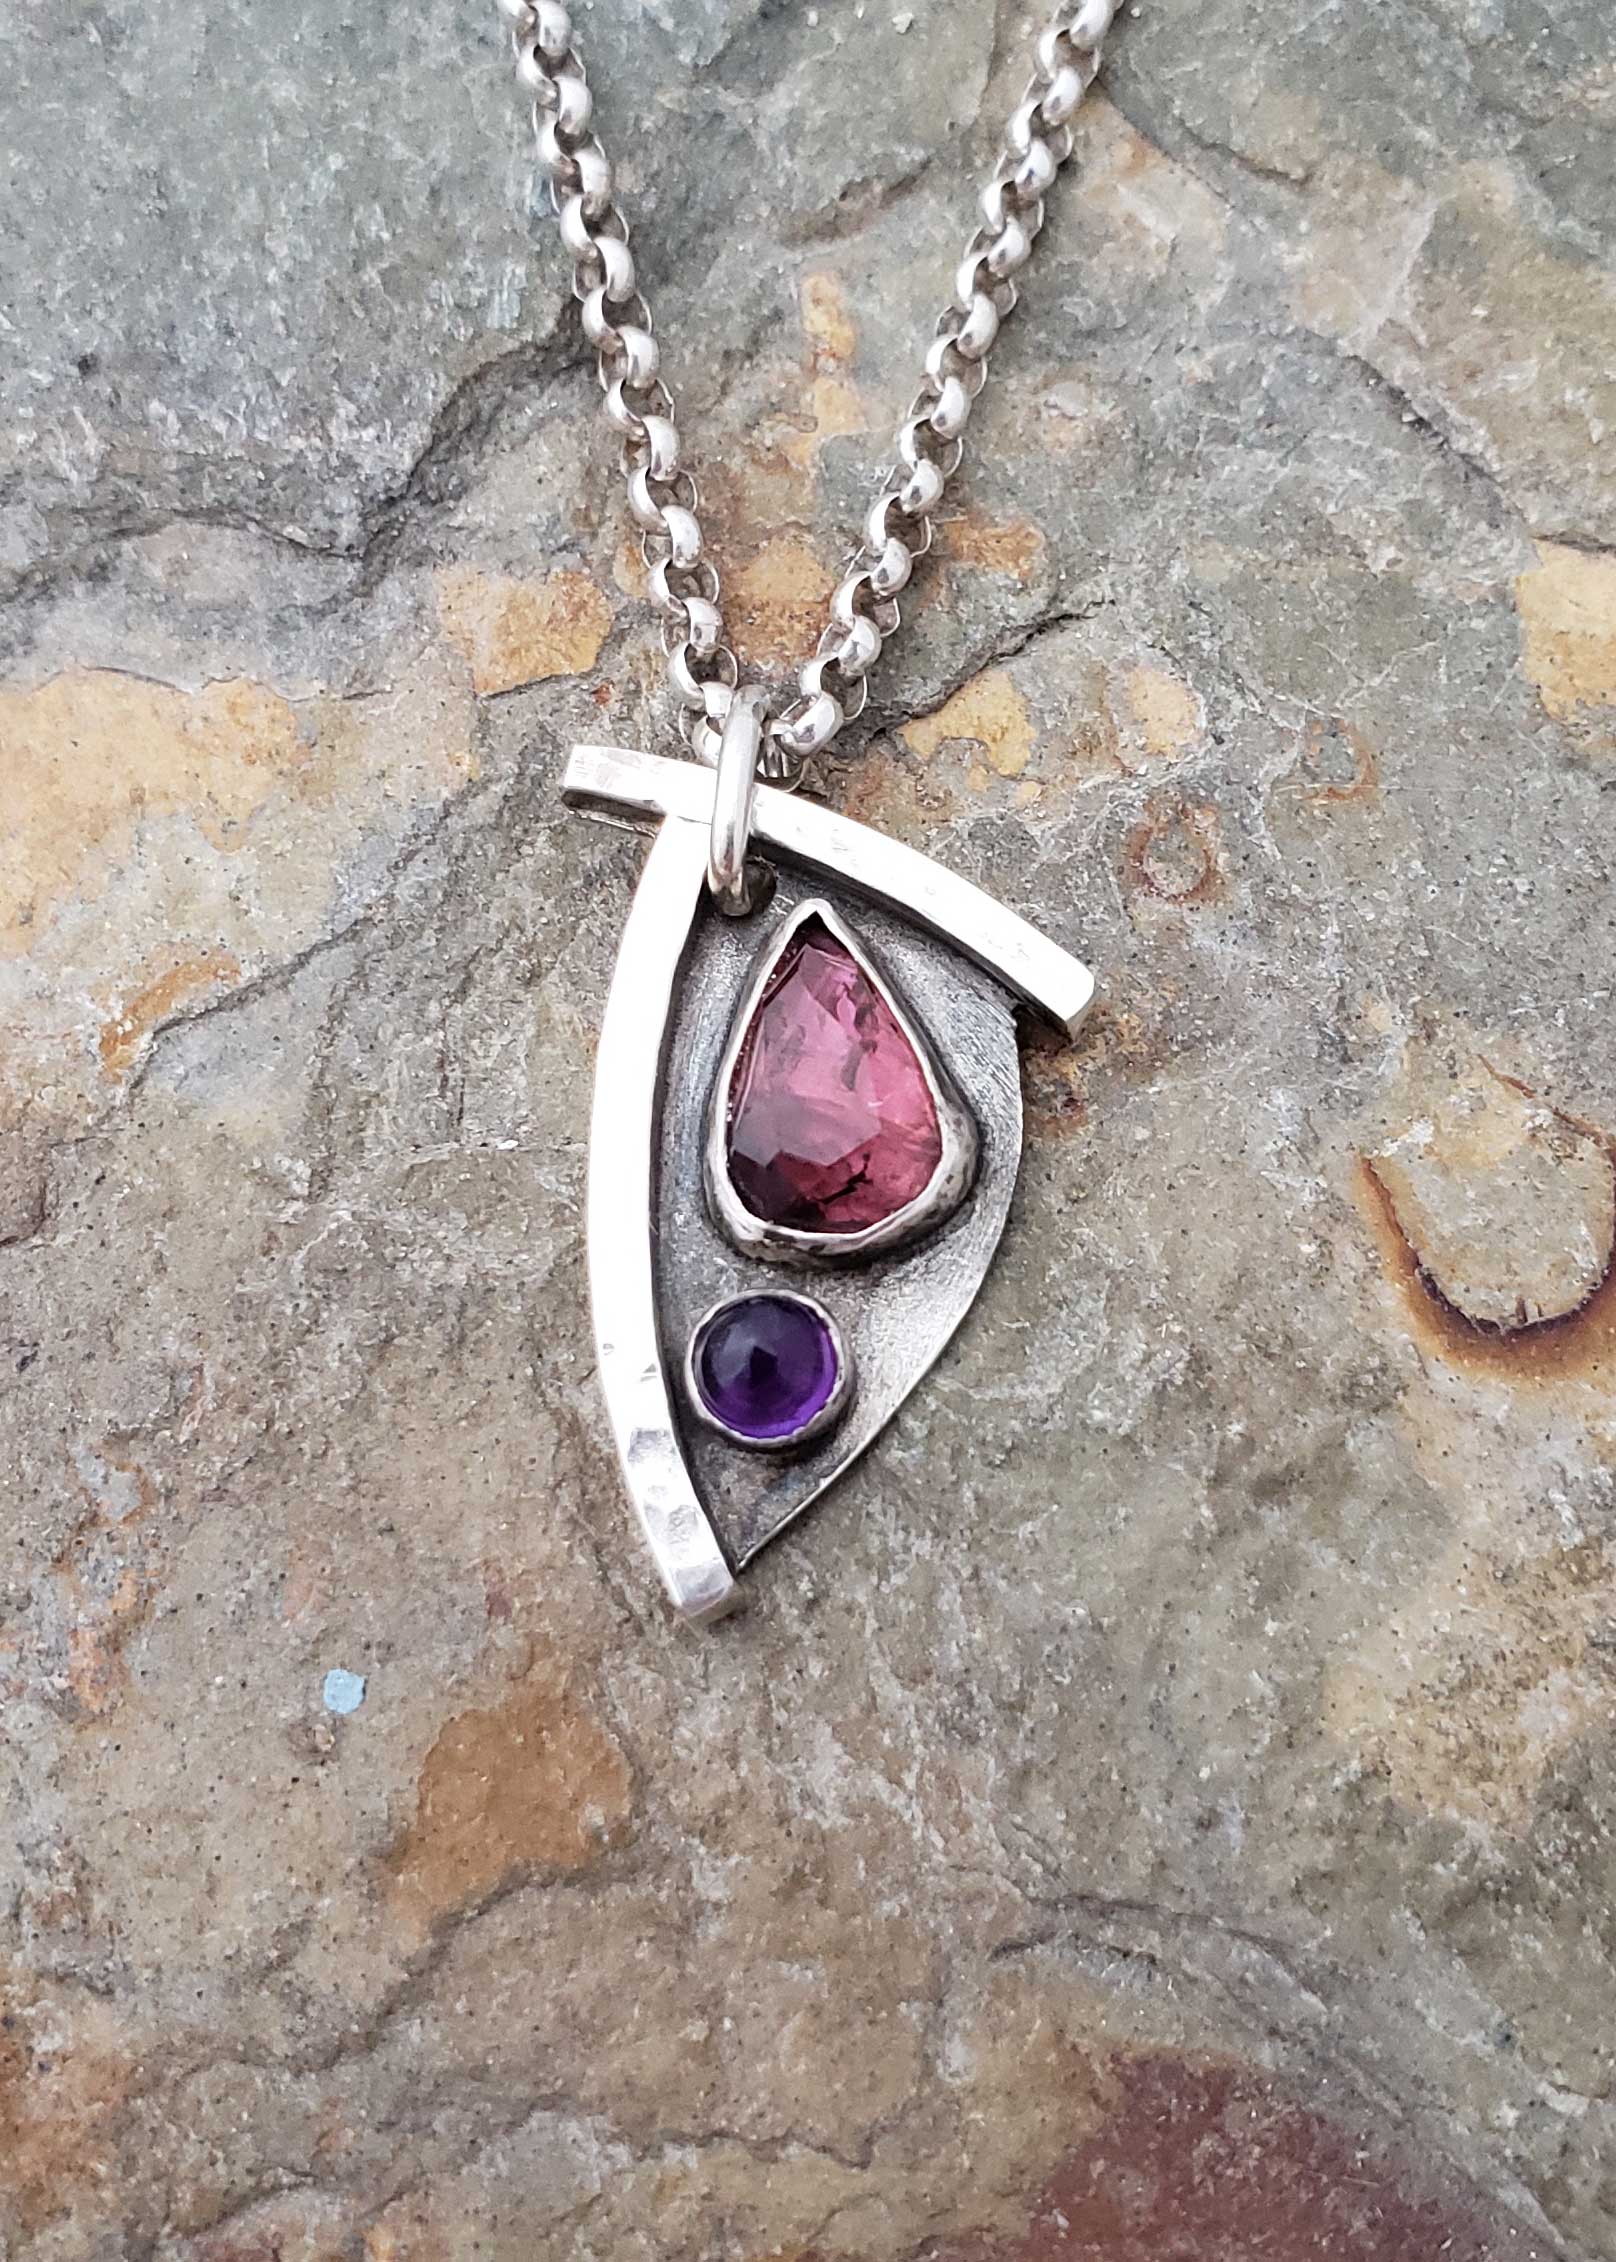 pinks and purples in this petite pendant, by Dona Miller 